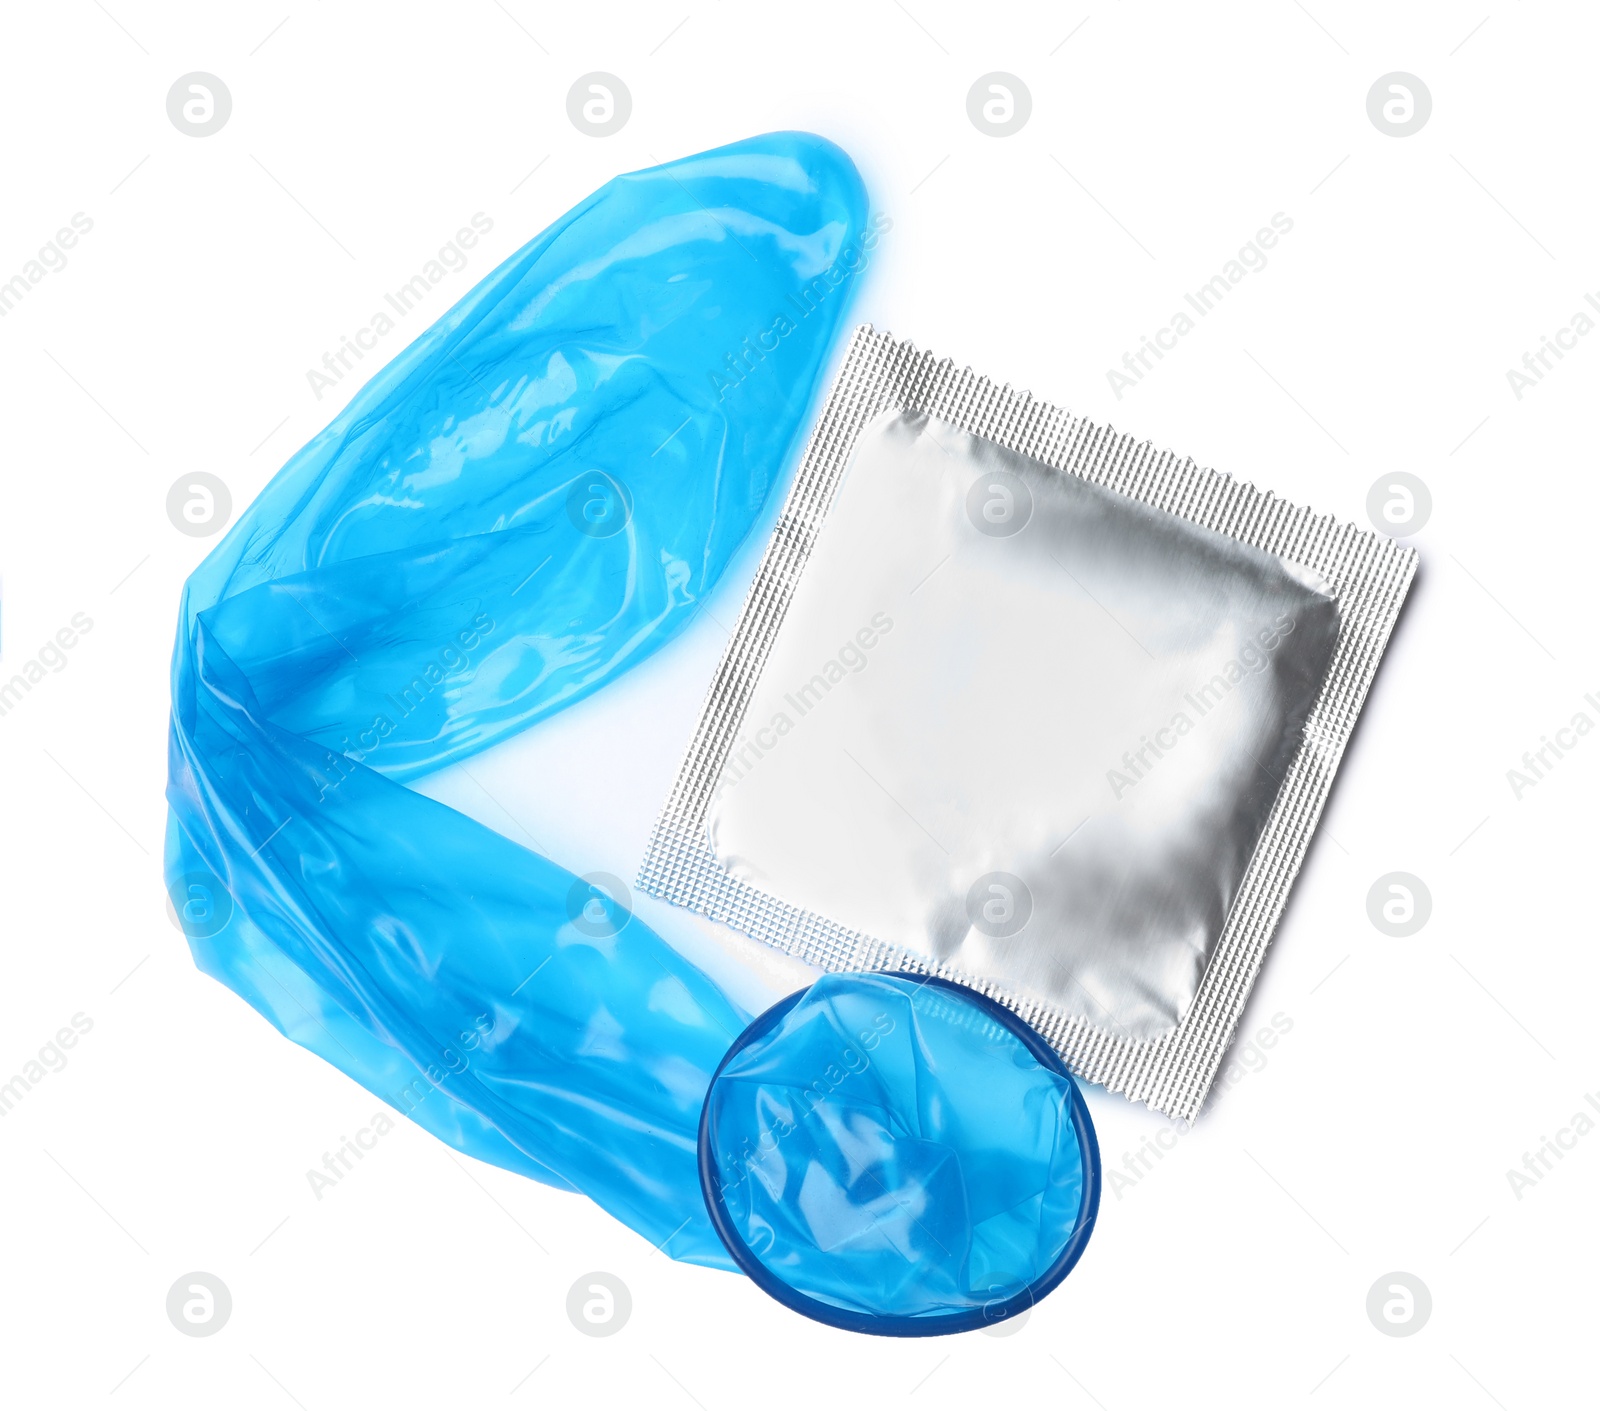 Image of Unrolled blue condom and package on white background, top view. Safe sex